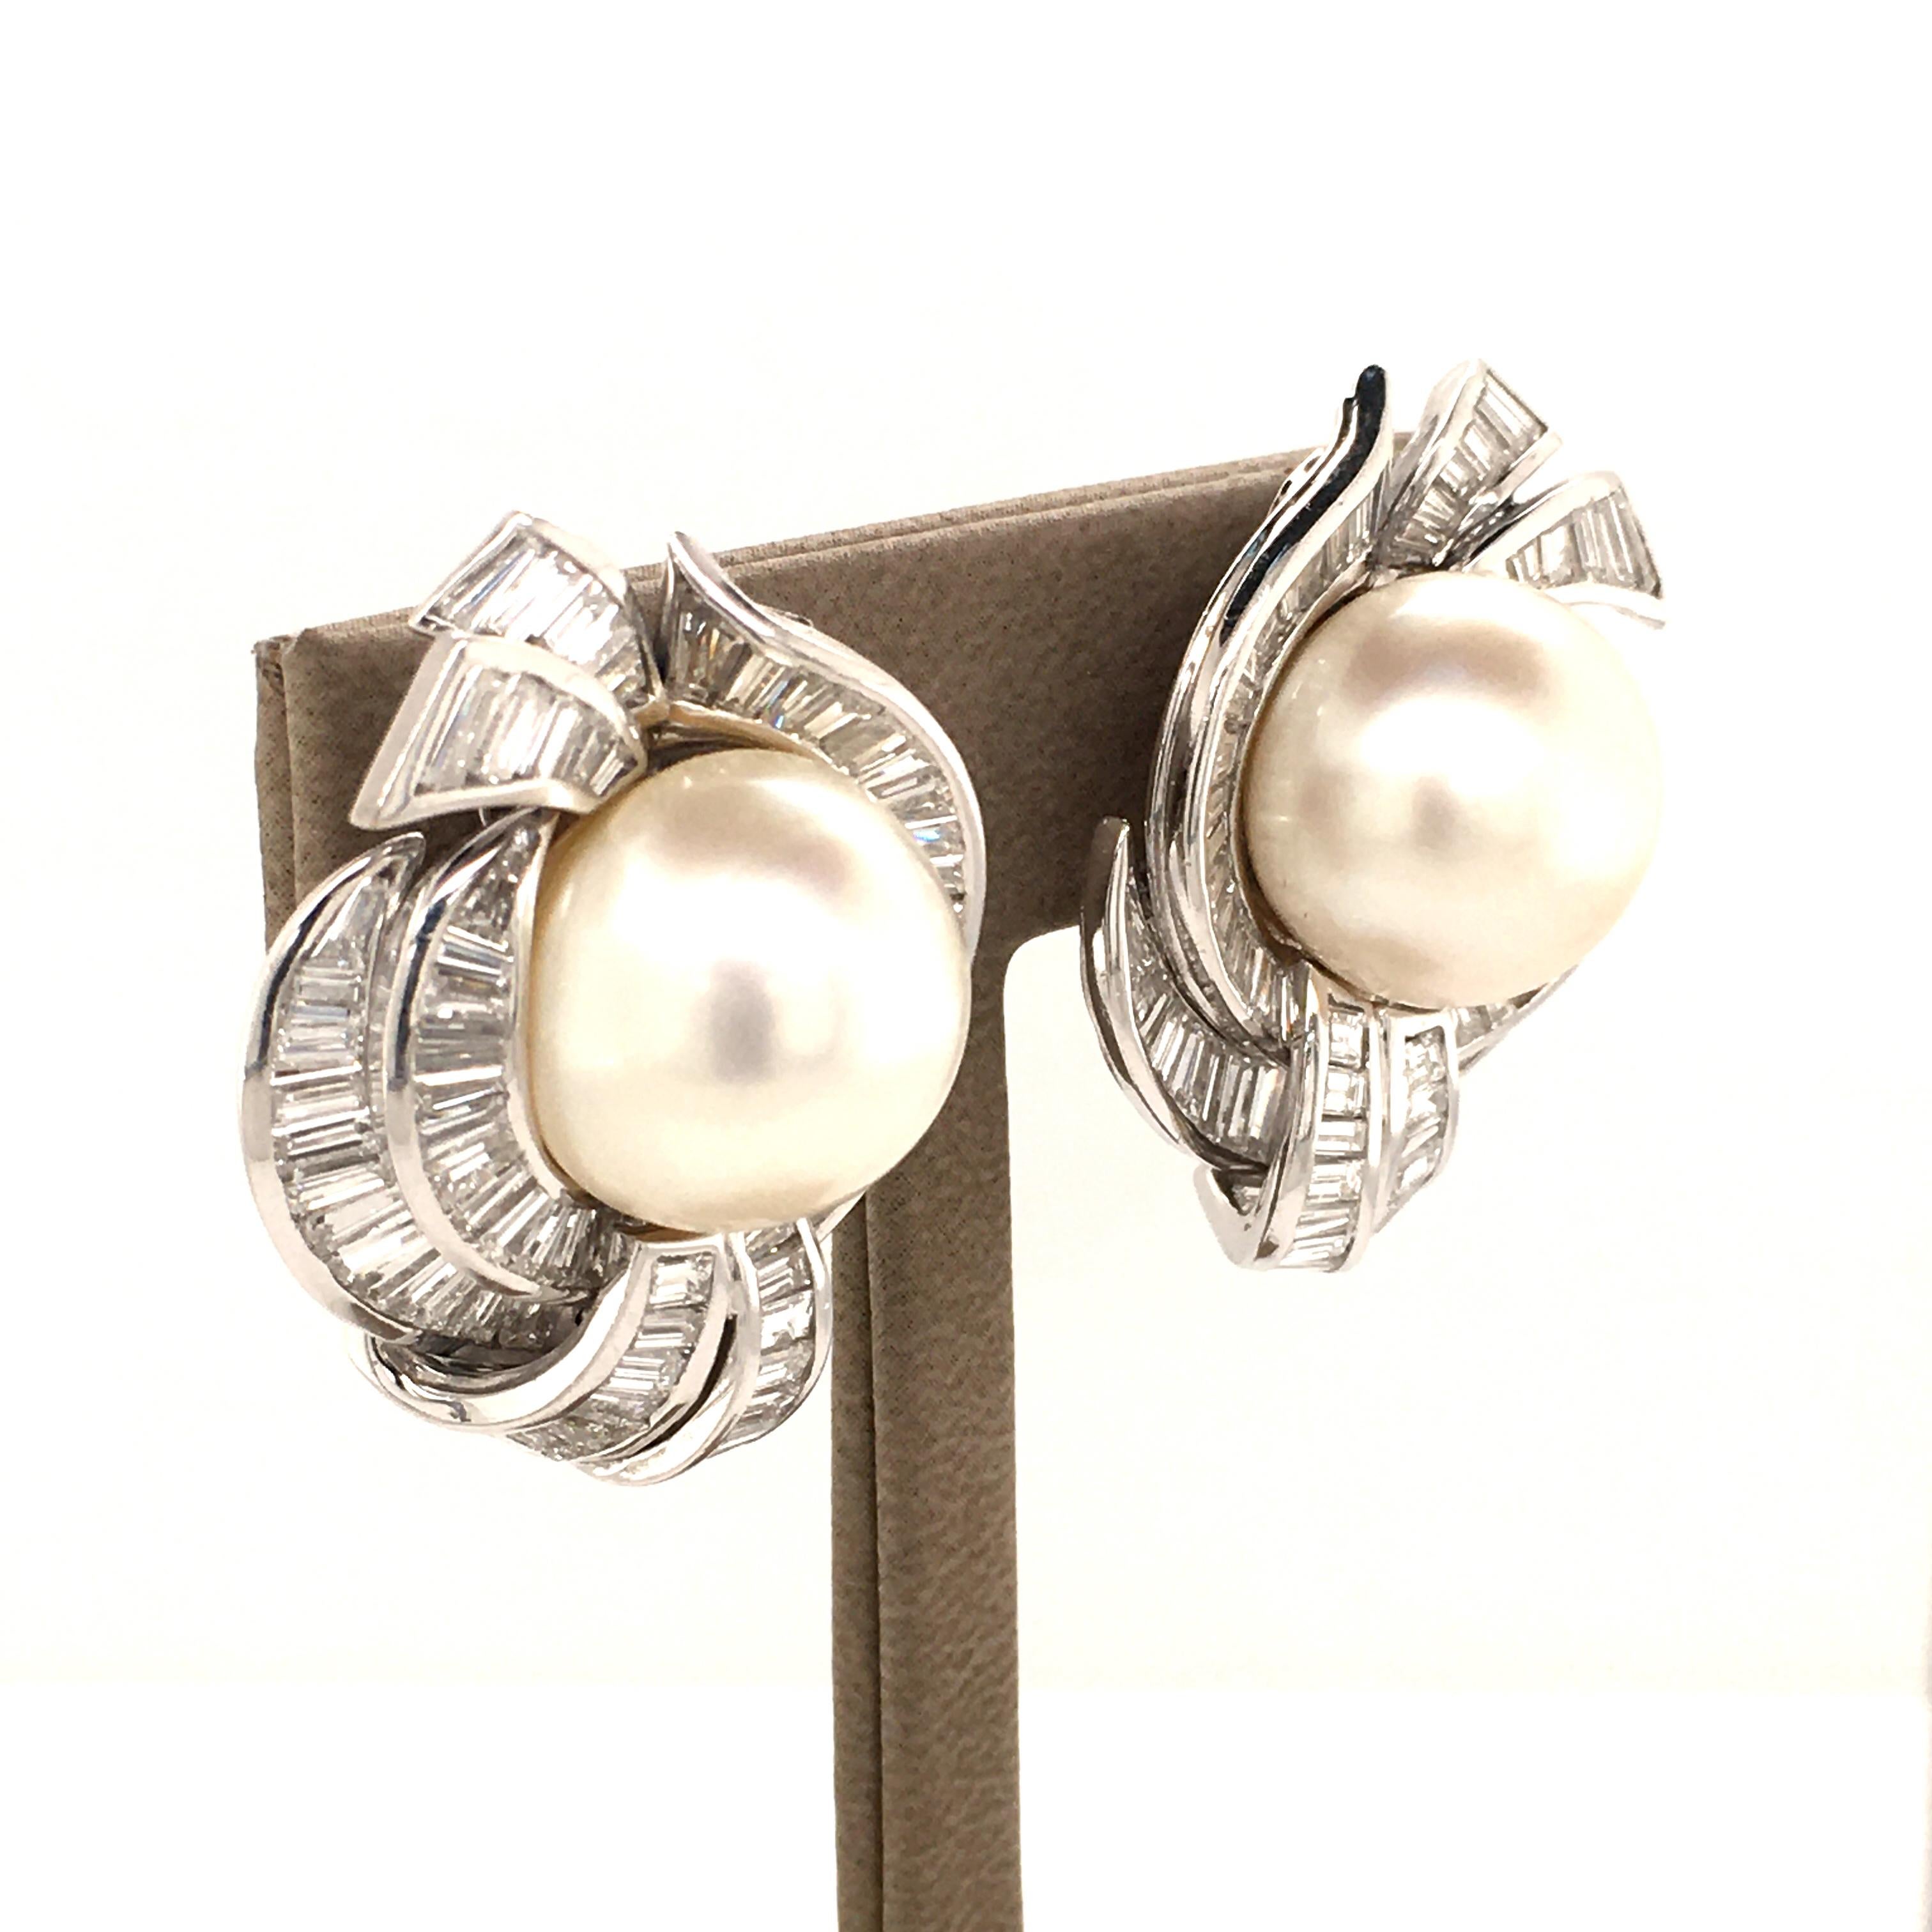 Stunning South Sea Cultured Pearls Earrings in White Gold 750 with Diamonds In Good Condition For Sale In Lucerne, CH